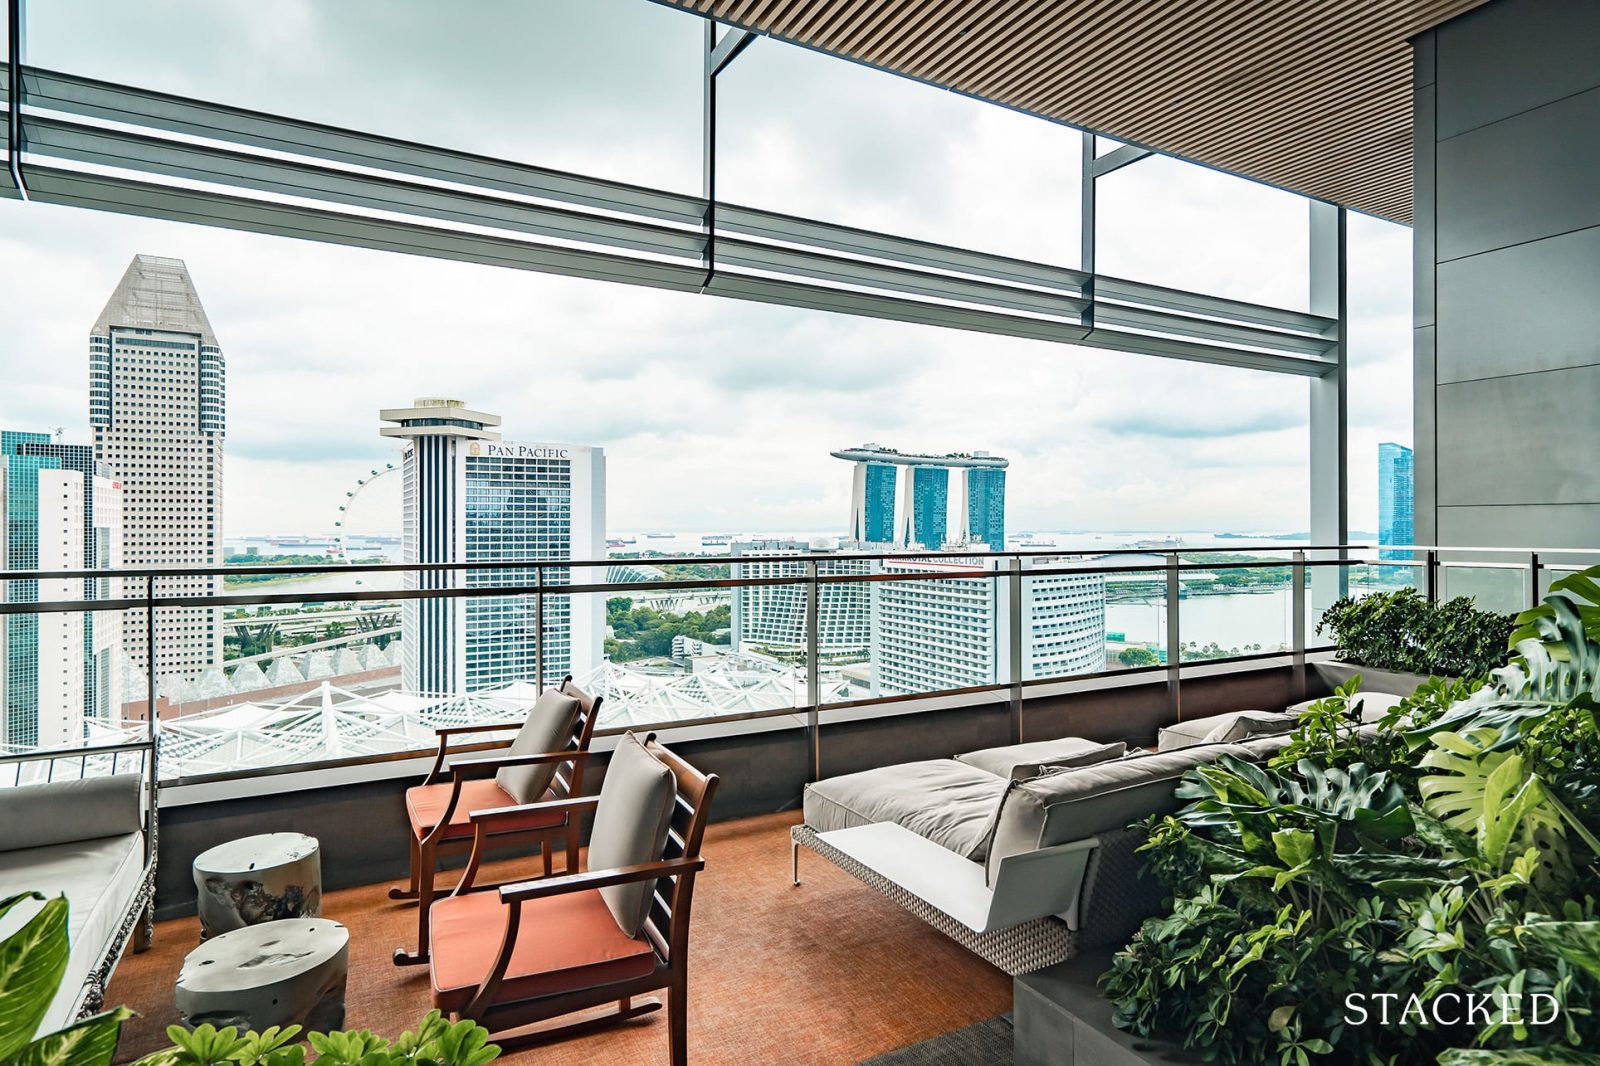 South Beach residences viewing gallery